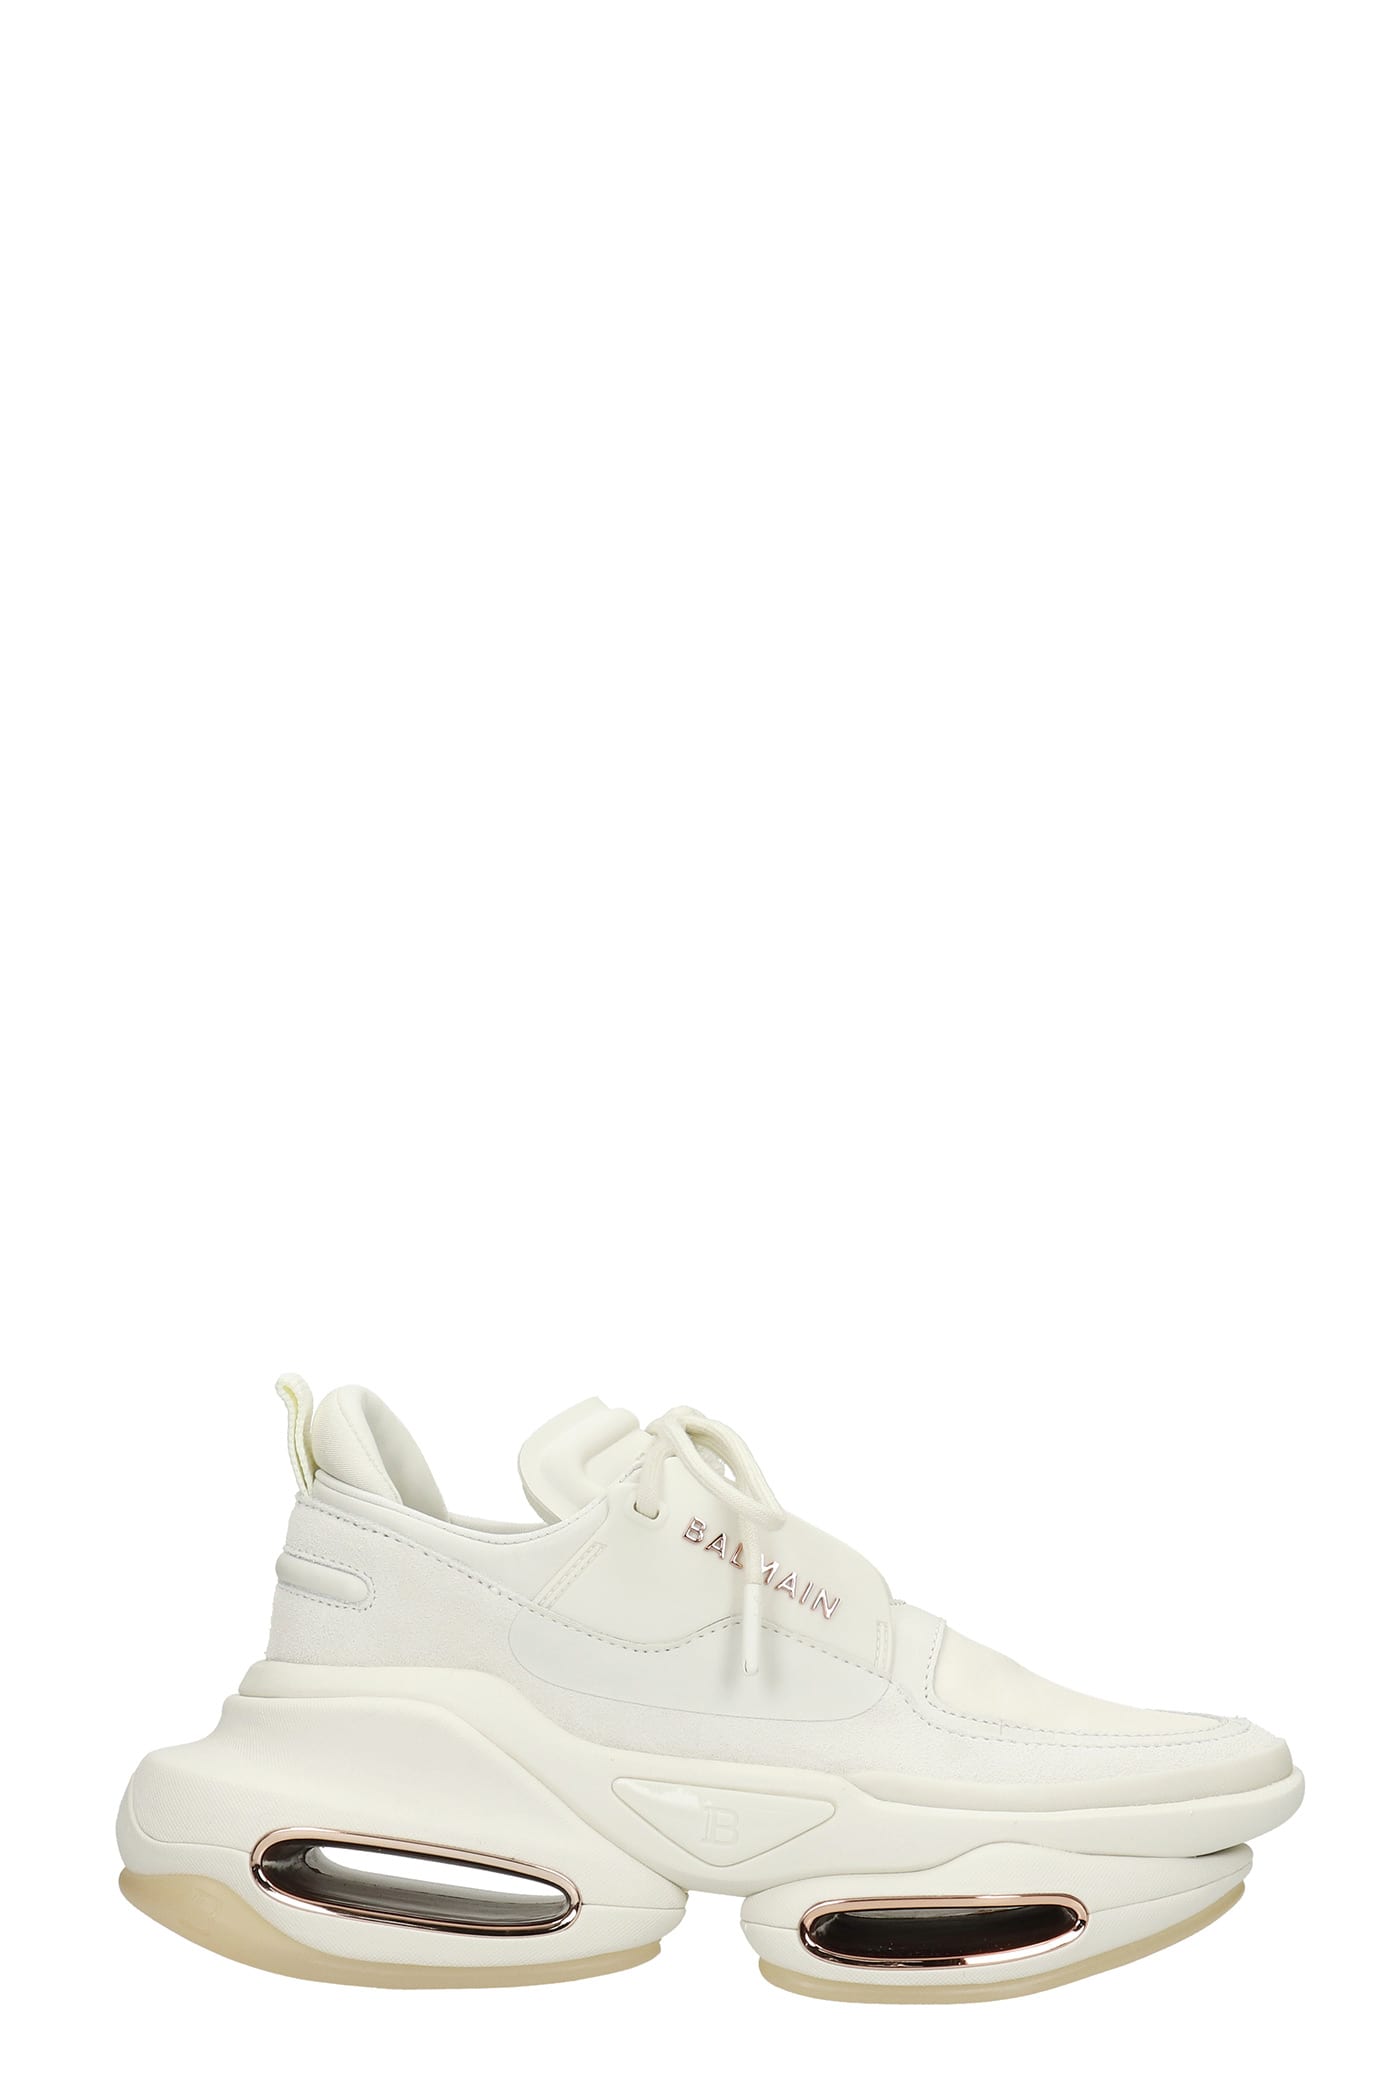 Balmain B Bold Sneakers In White Suede And Leather